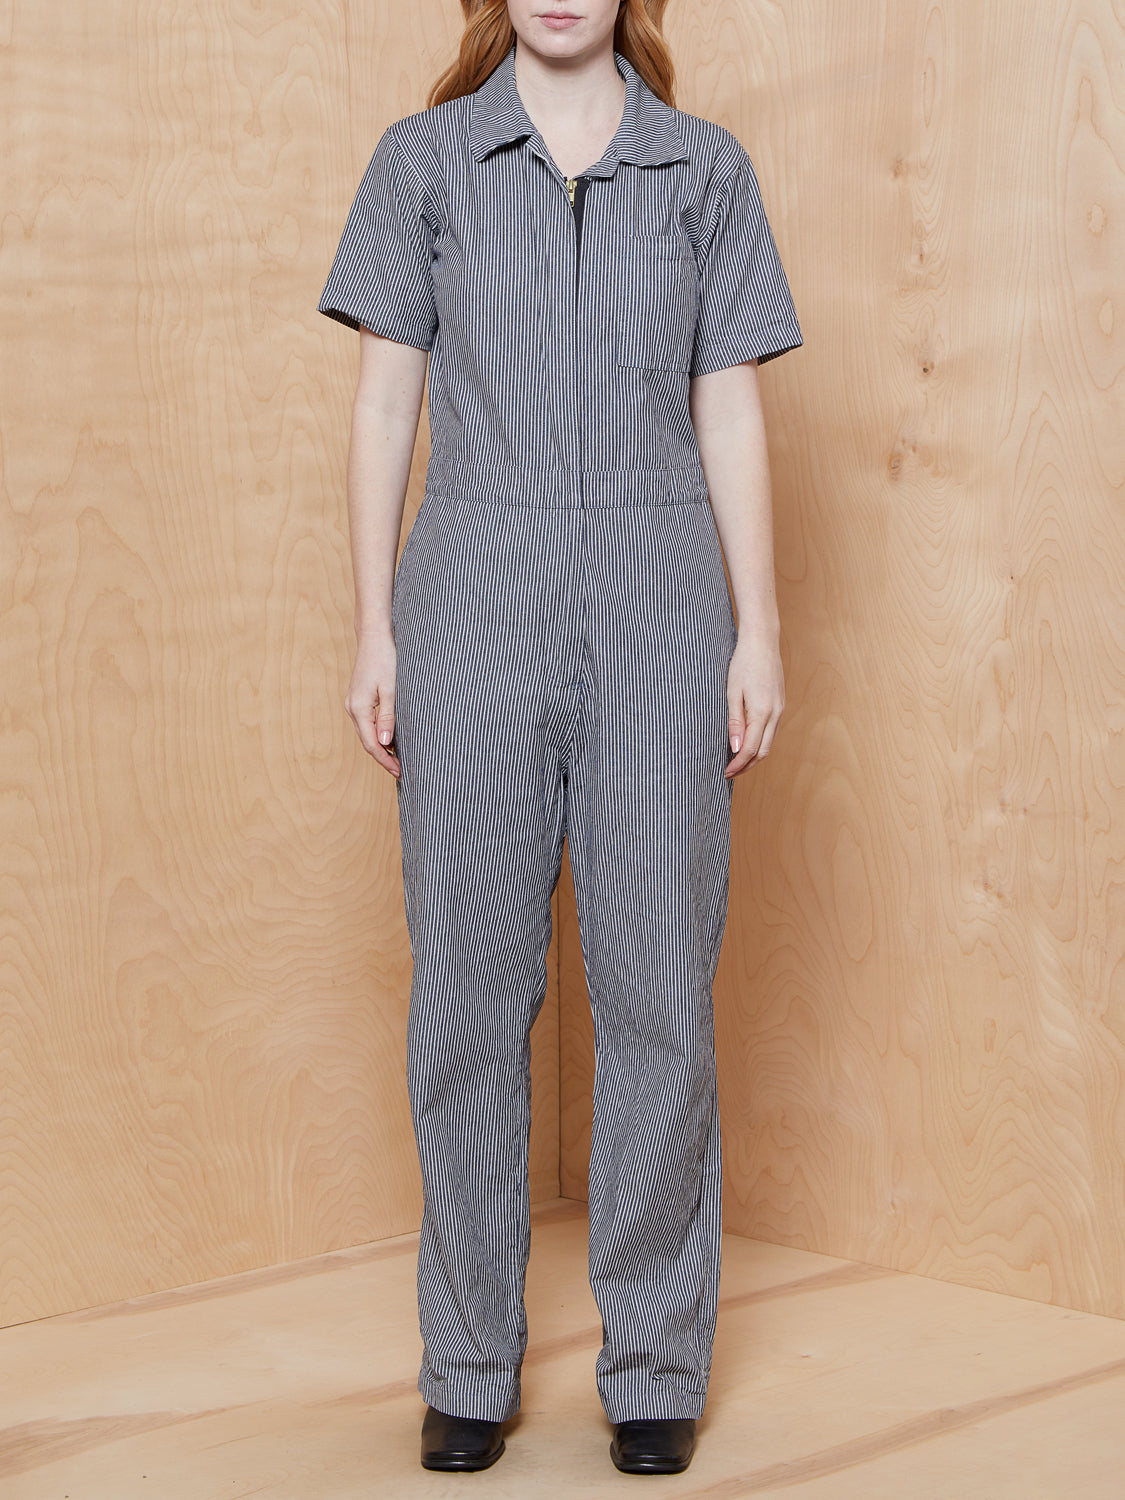 Nooworks Striped Shortsleeve Coveralls